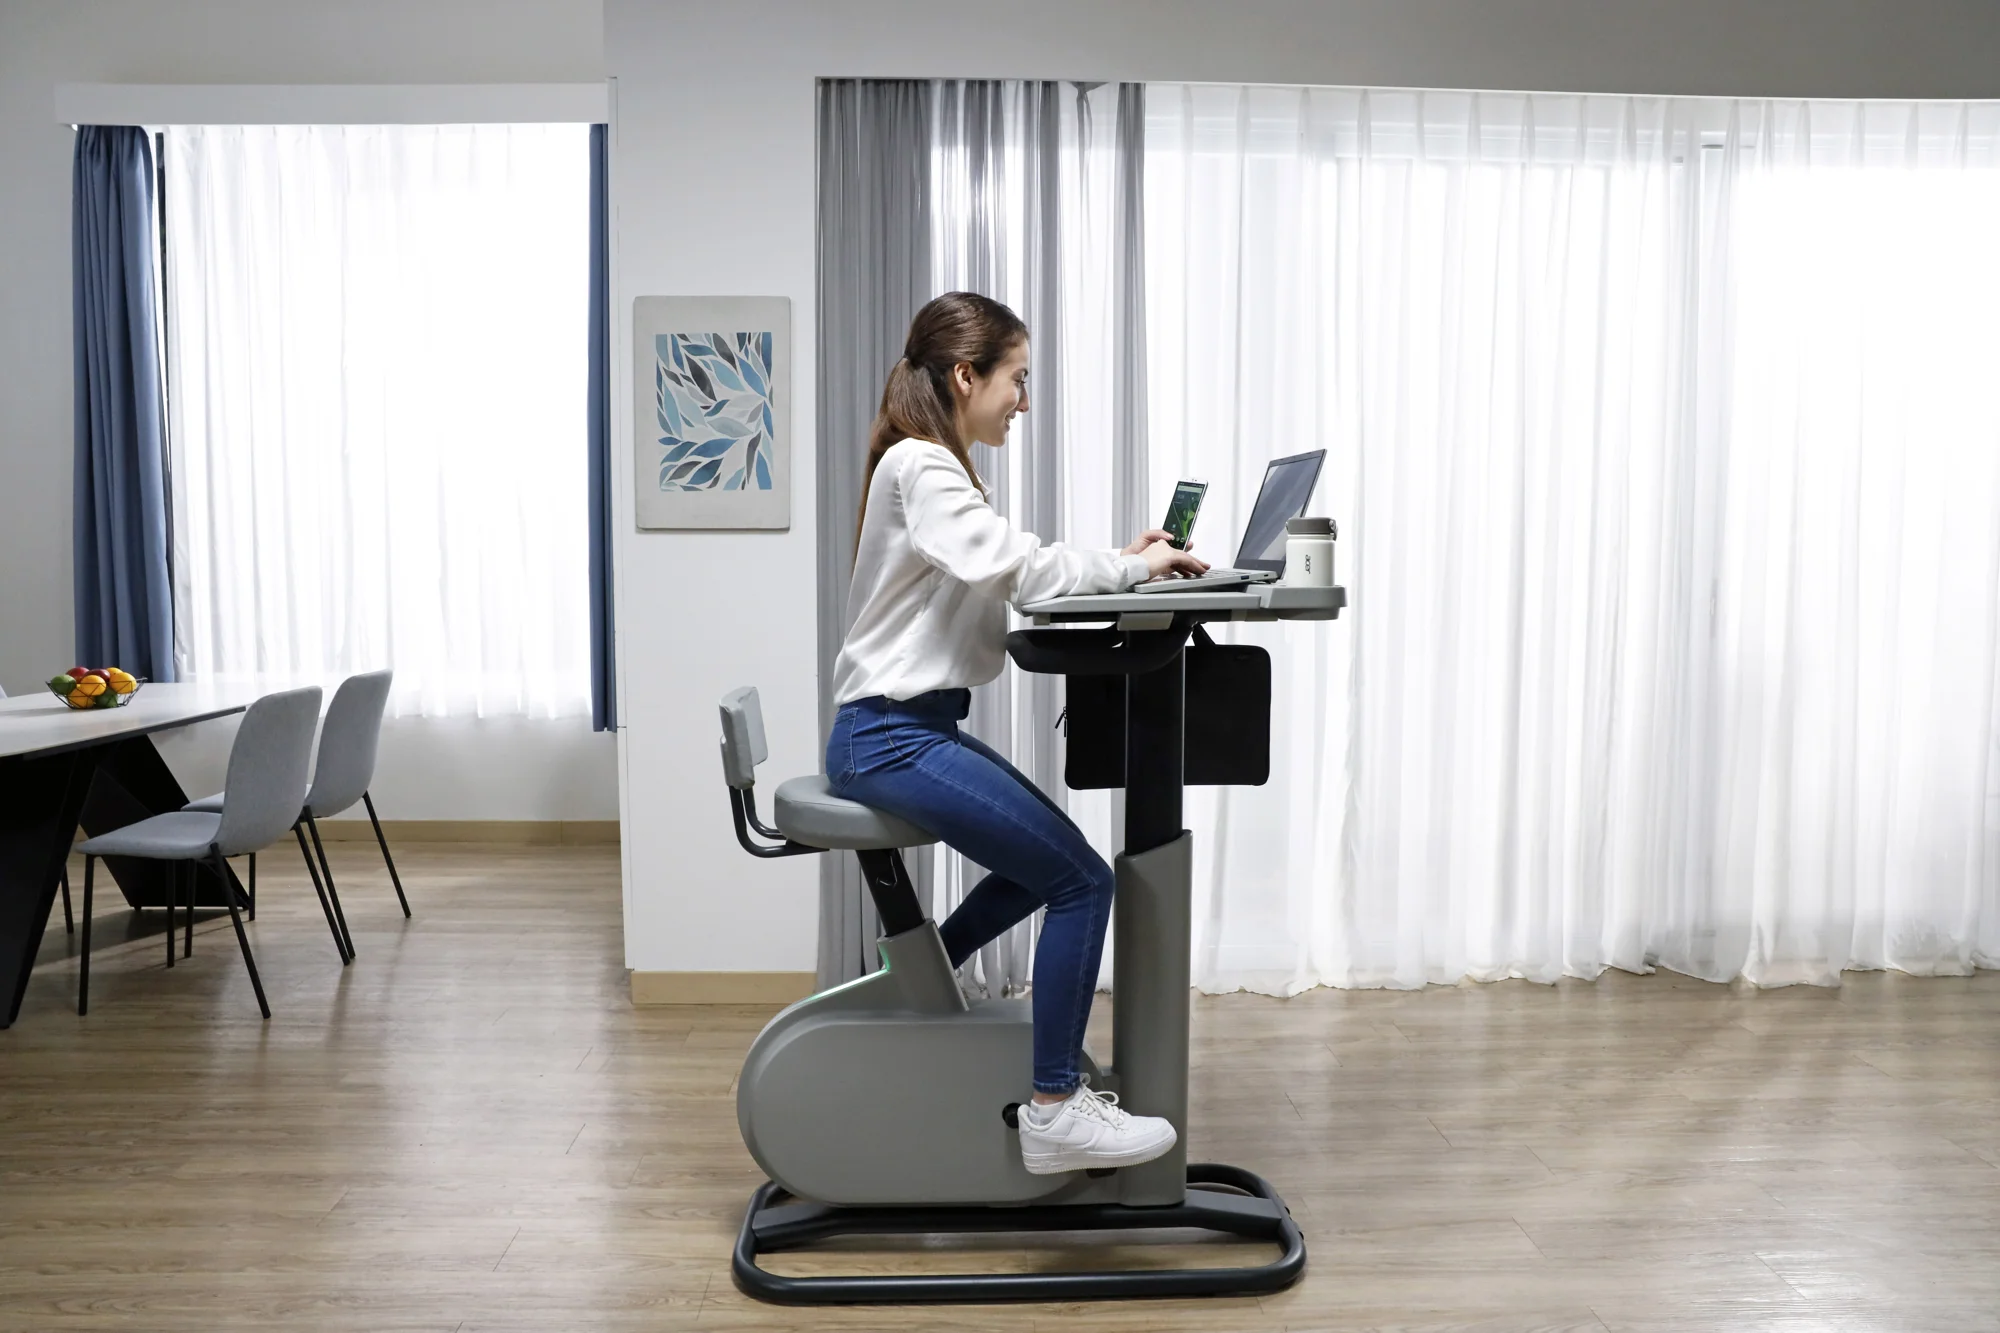 Exercise Bike/Work Desk Combo Allows you to Charge Your Devices